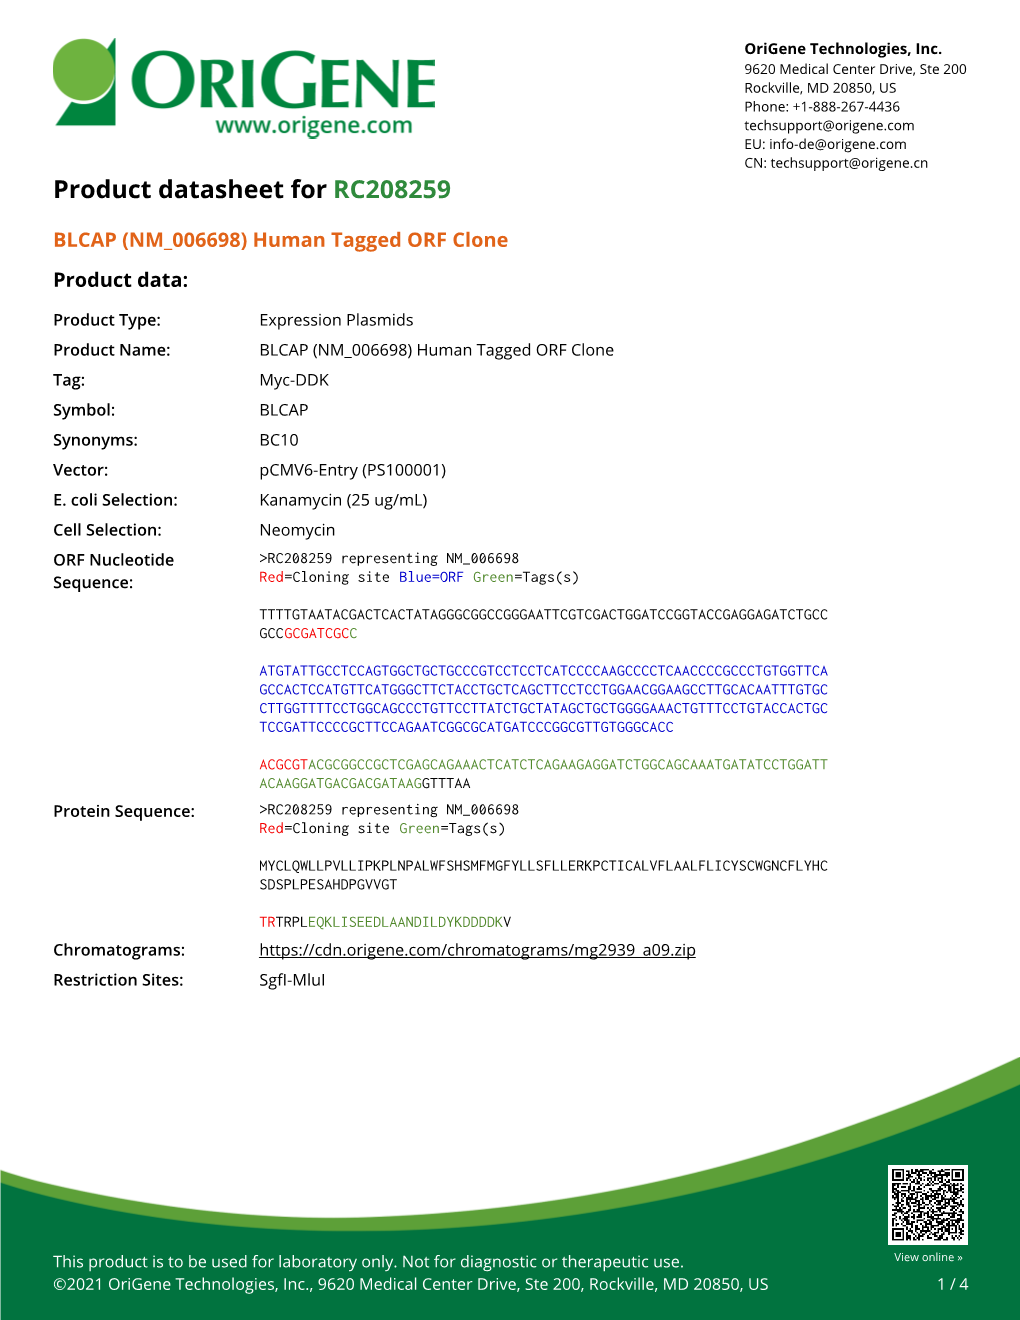 BLCAP (NM 006698) Human Tagged ORF Clone Product Data